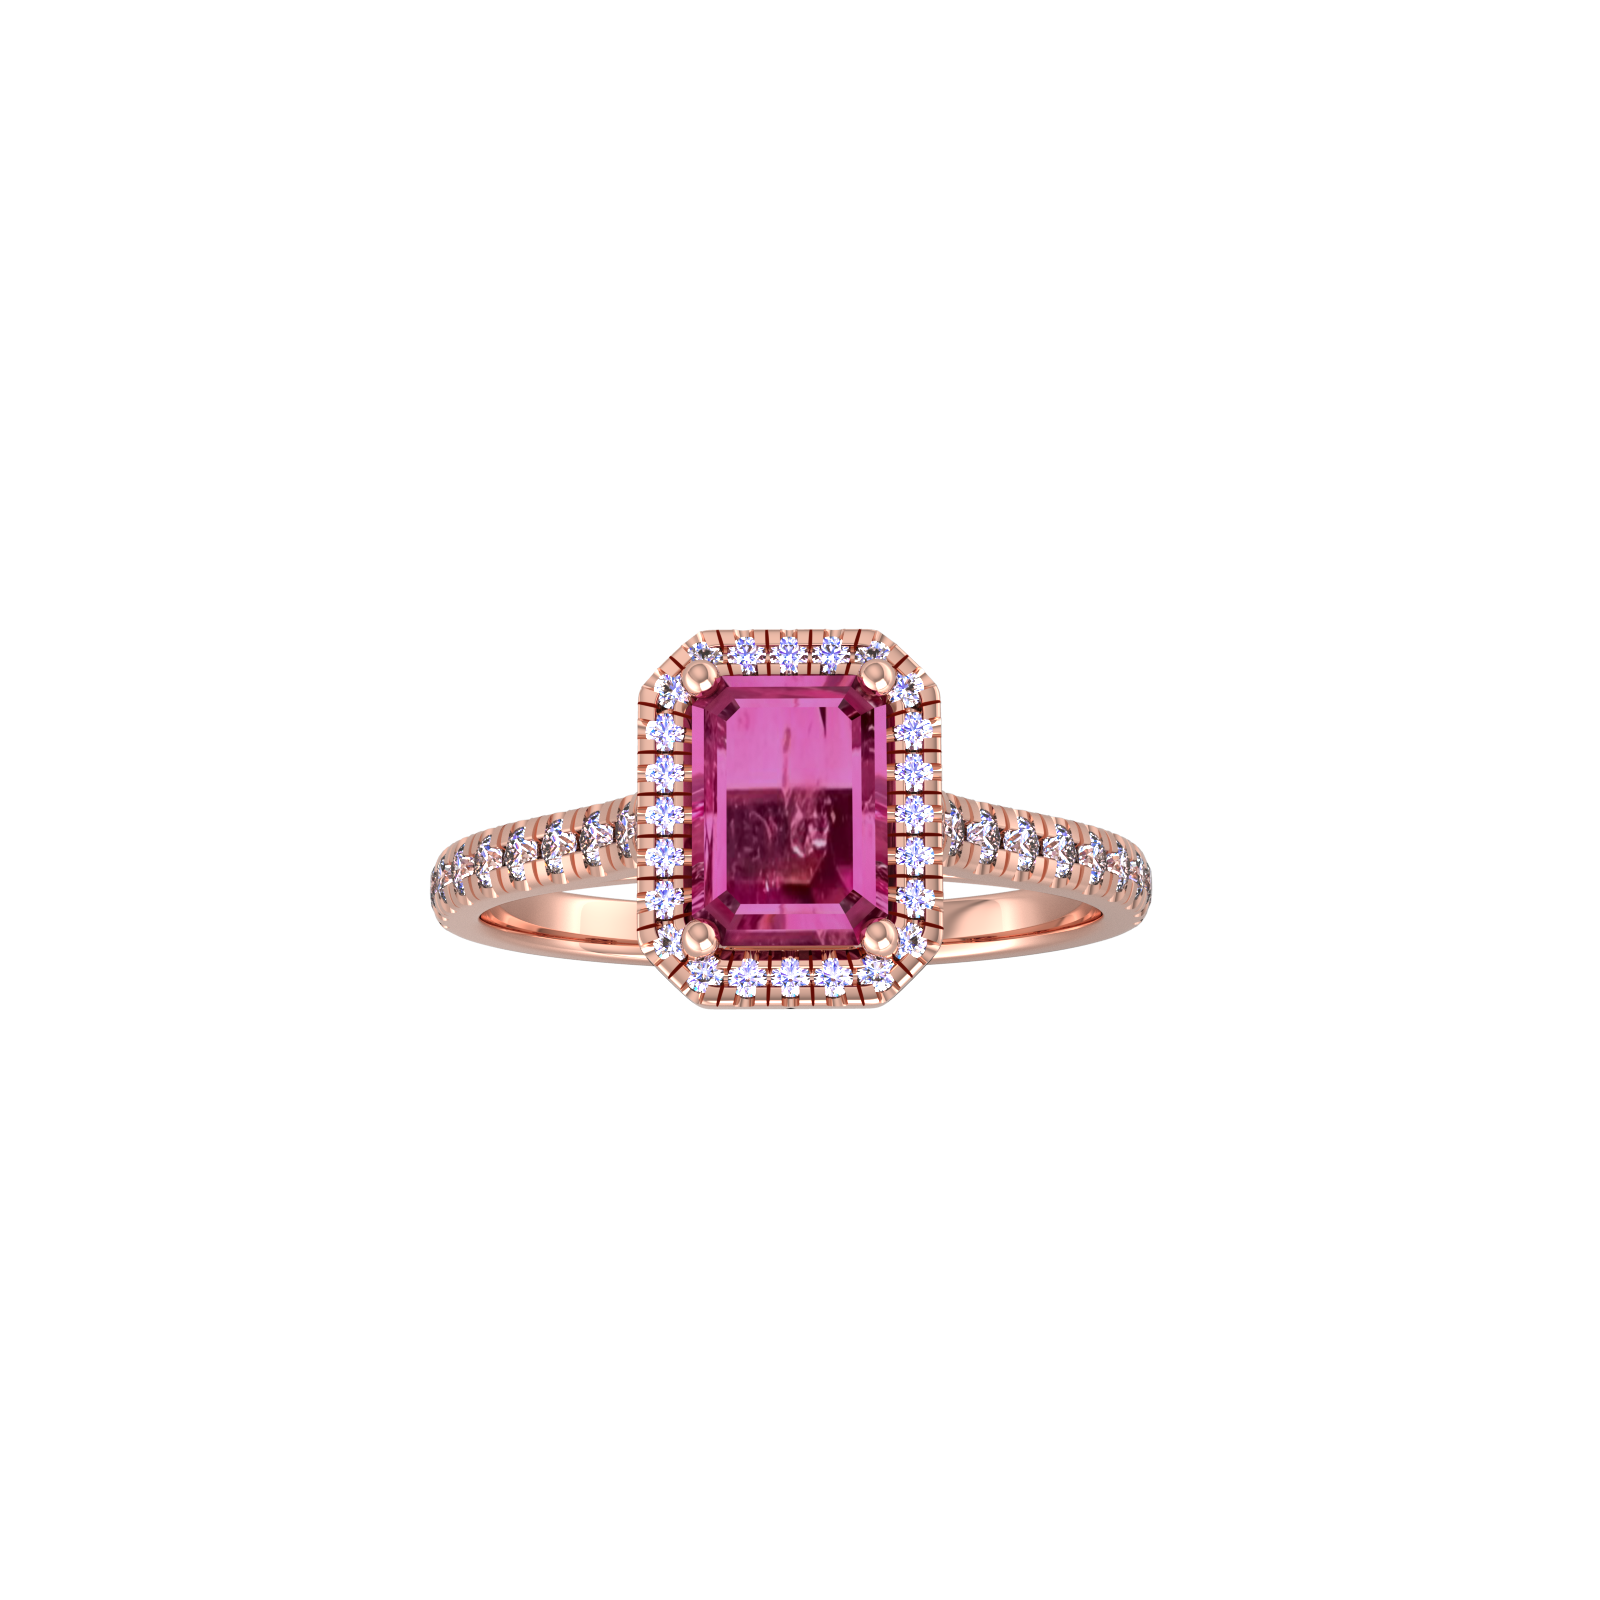 9ct Rose Gold Pink Tourmaline & Diamond Halo Ring with Diamond Shoulders - Ring Size G.5